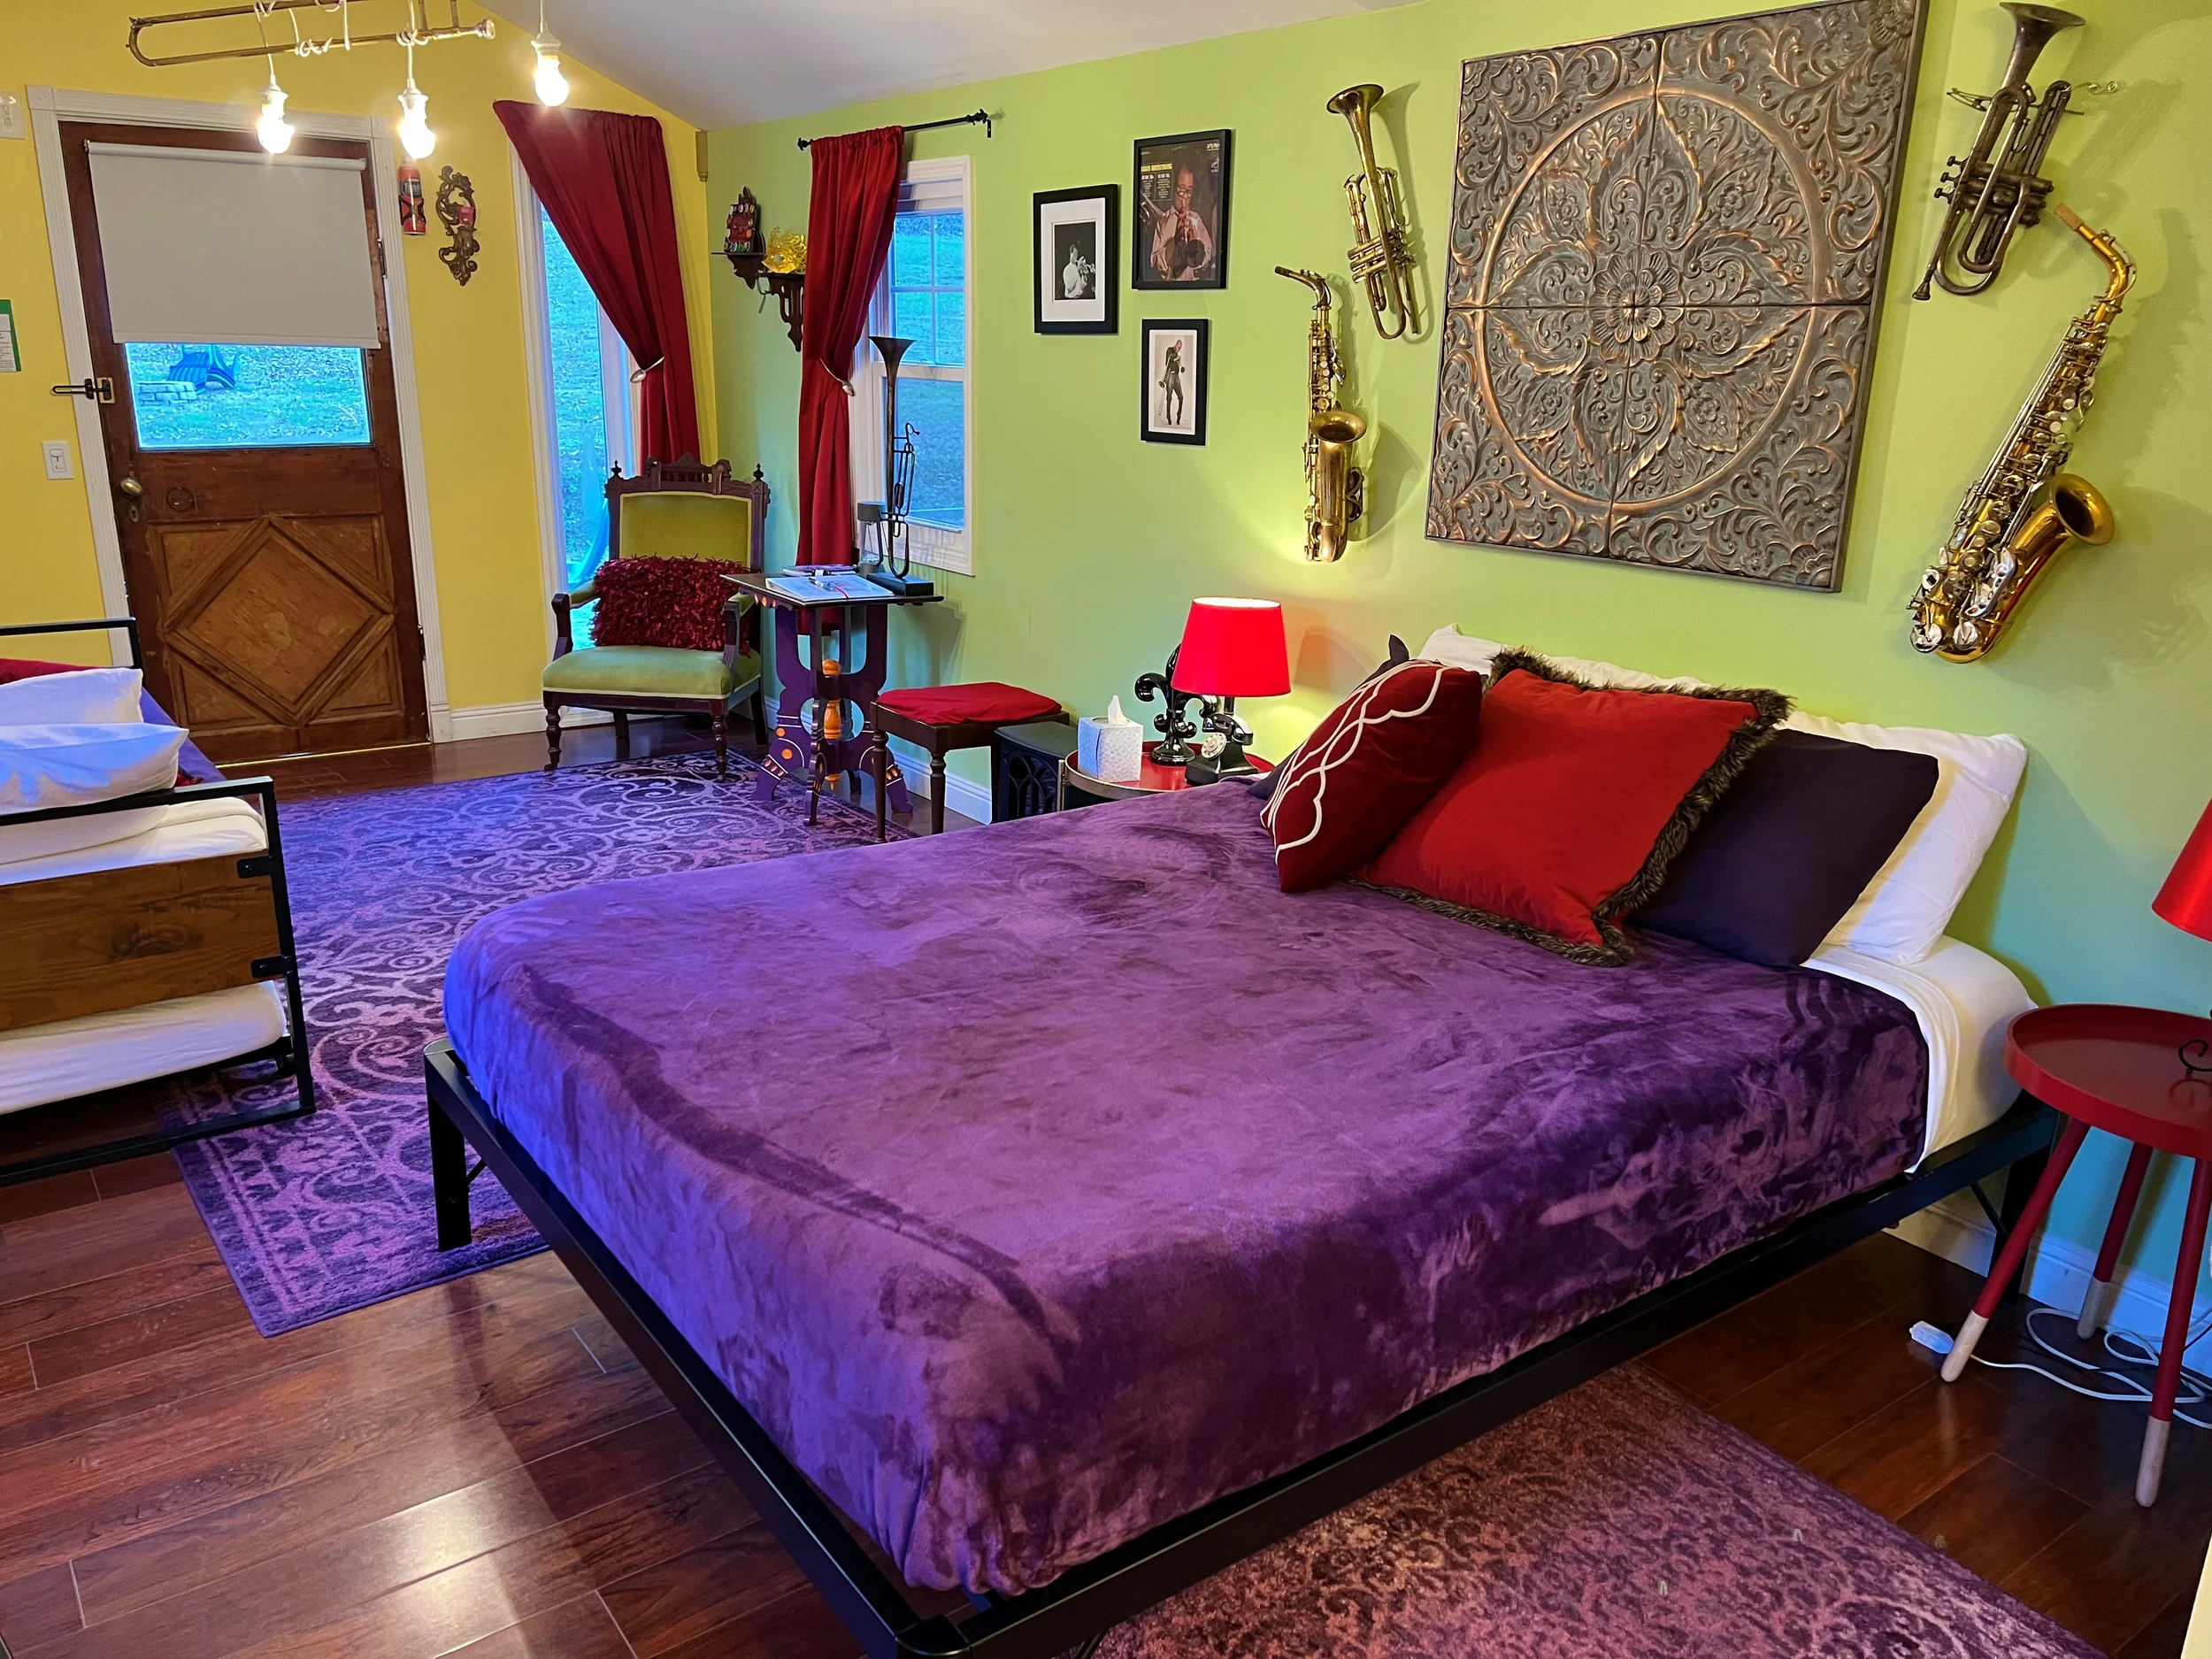 New Orleans themed tiny house with jazz instruments and elements